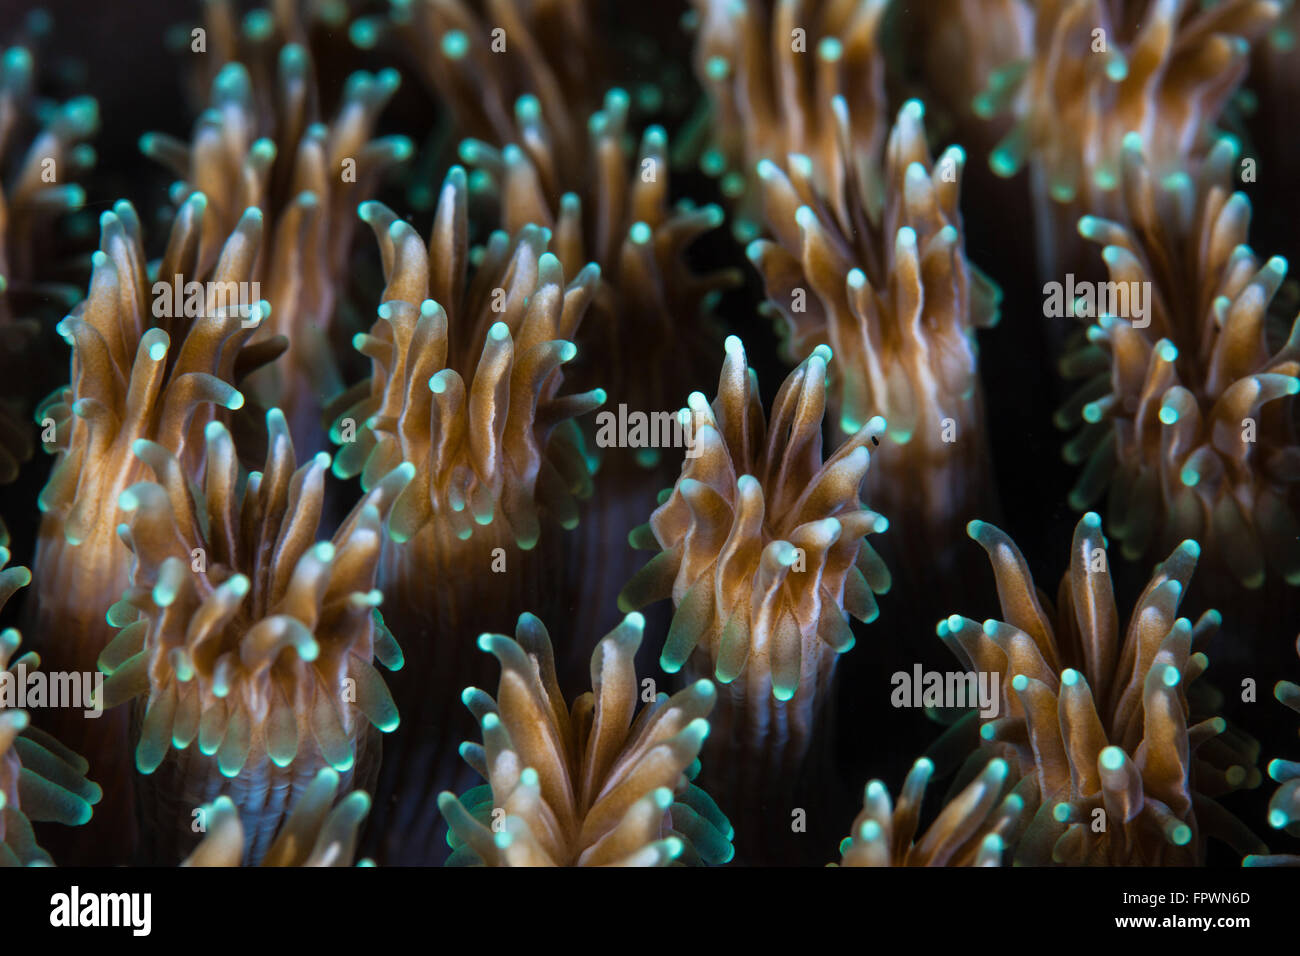 Polyps of a Galaxea coral colony grow on a reef in Indonesia. This tropical region, within the Coral Triangle, is home to an inc Stock Photo